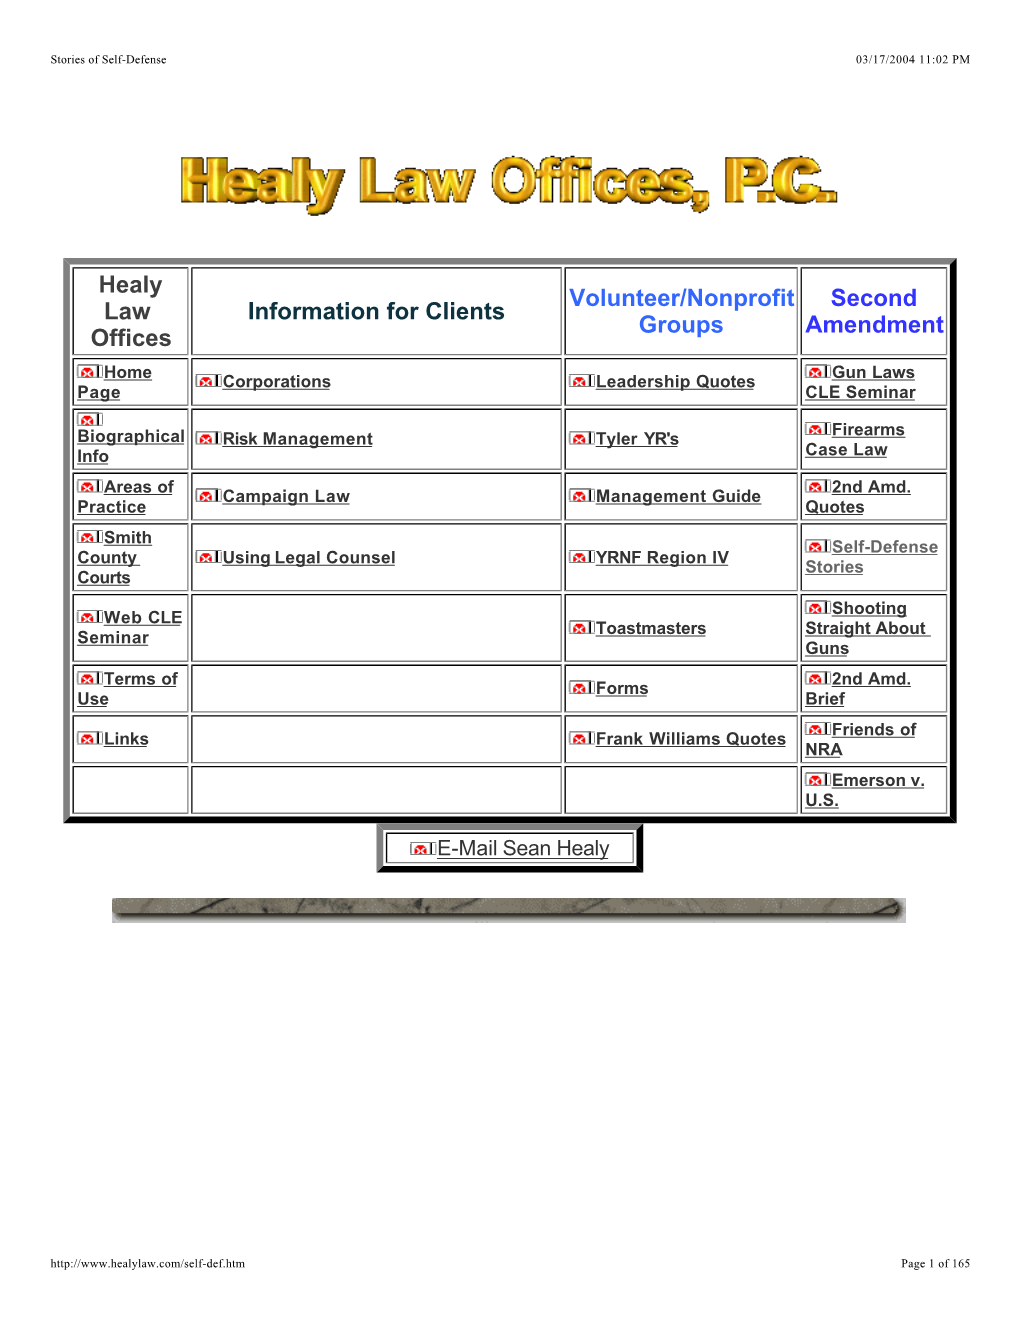 Healy Law Offices Information for Clients Volunteer/Nonprofit Groups